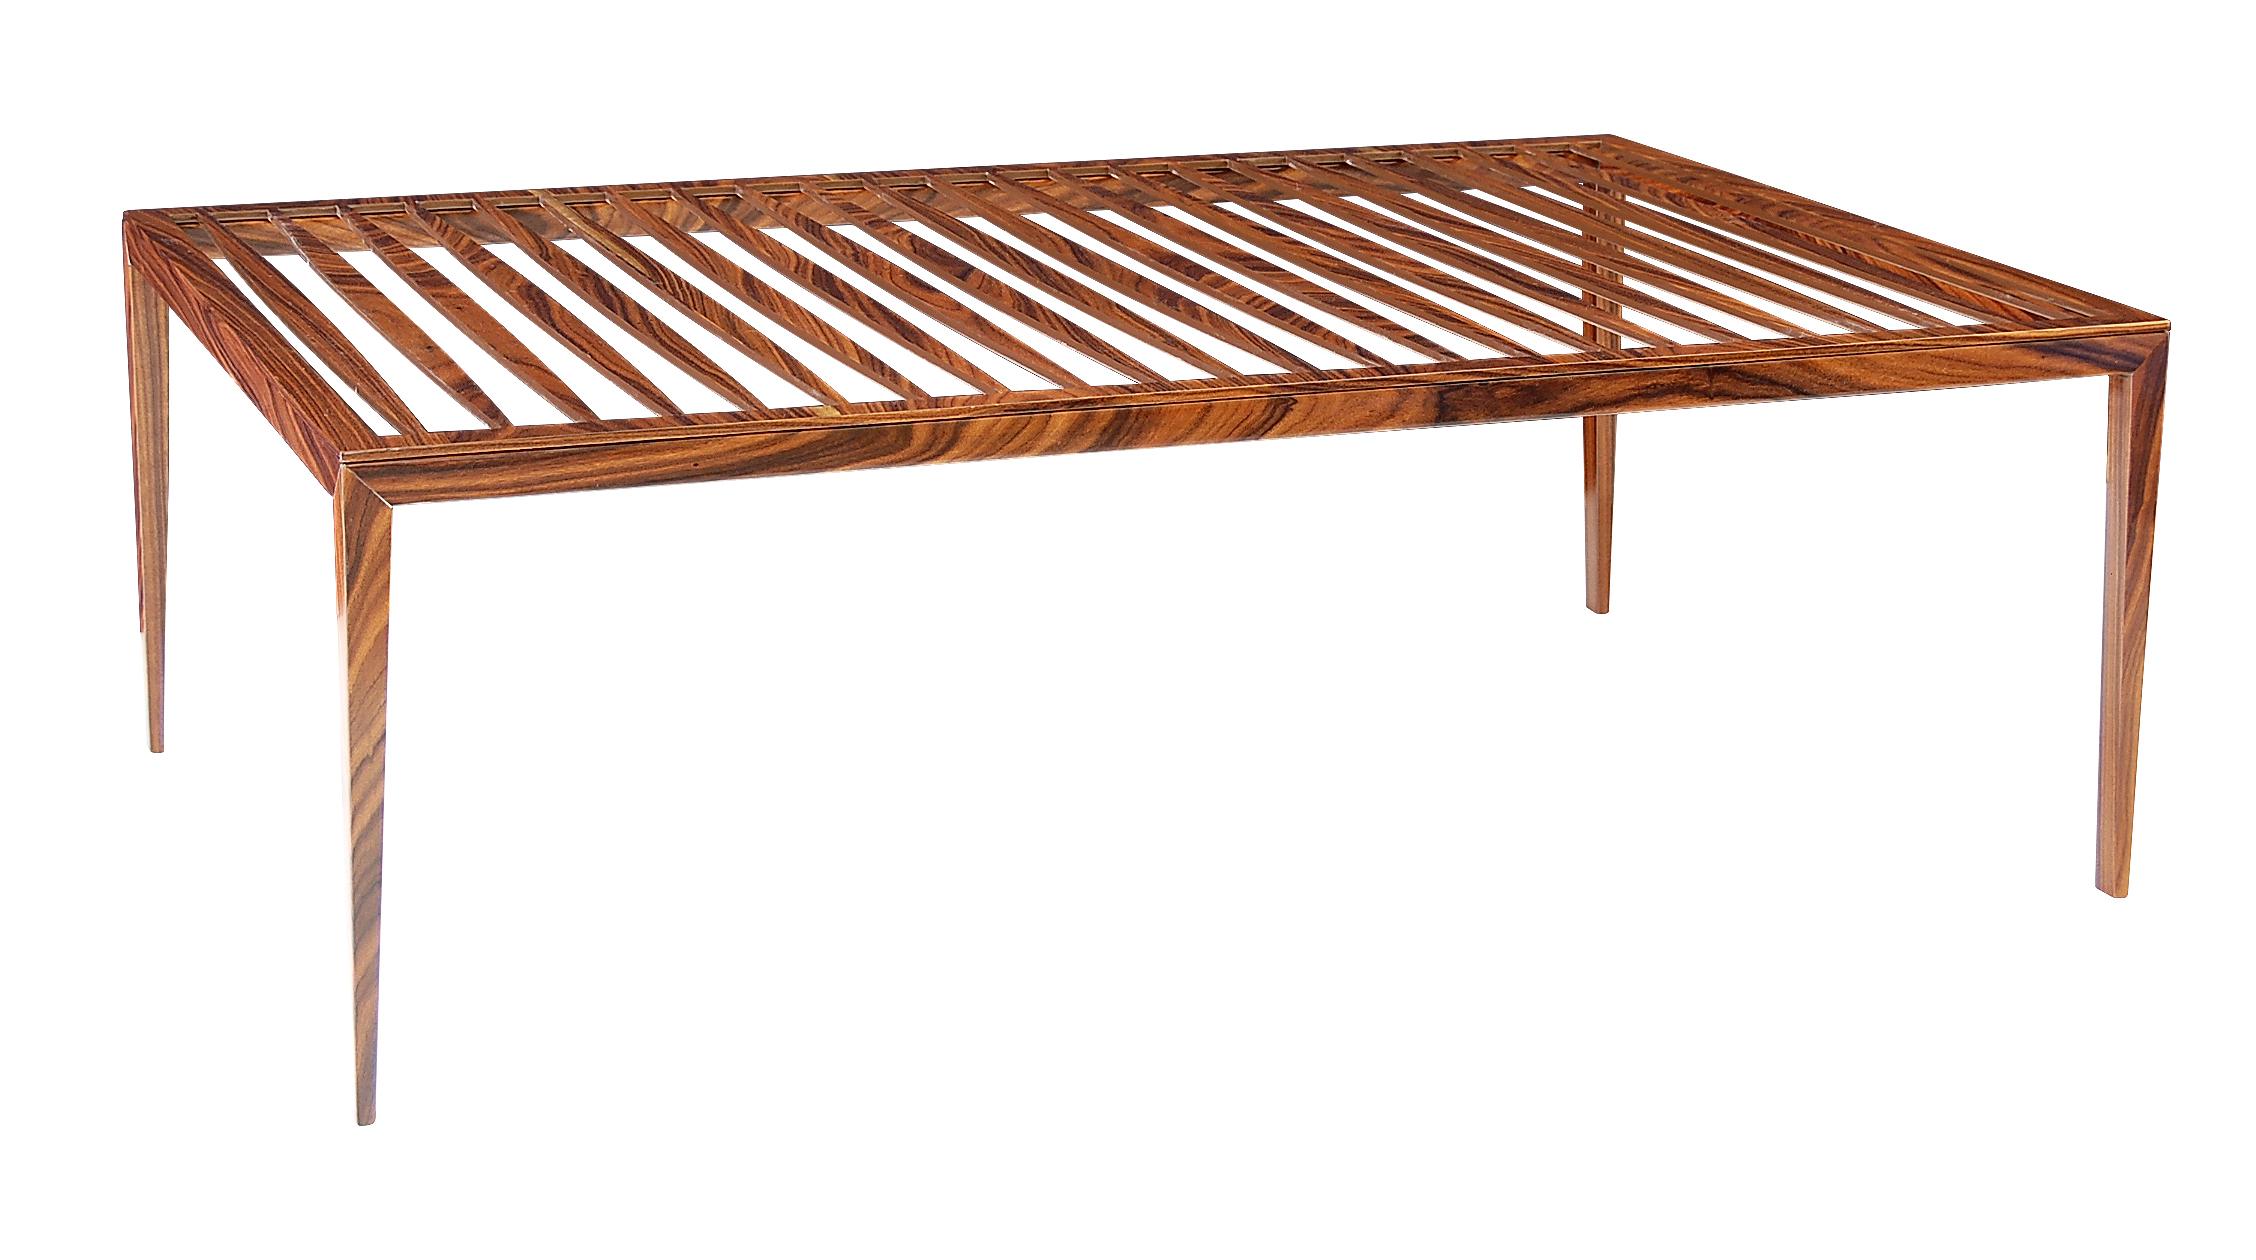 This coffee table designed by Roberta Rampazzo and produced by the high-end Brazilian company Vermeil. The Minimalist wooden table is made in Pau Ferro wood and is an elegant, clean and timeless piece with stunning handmade finishing. A very unique